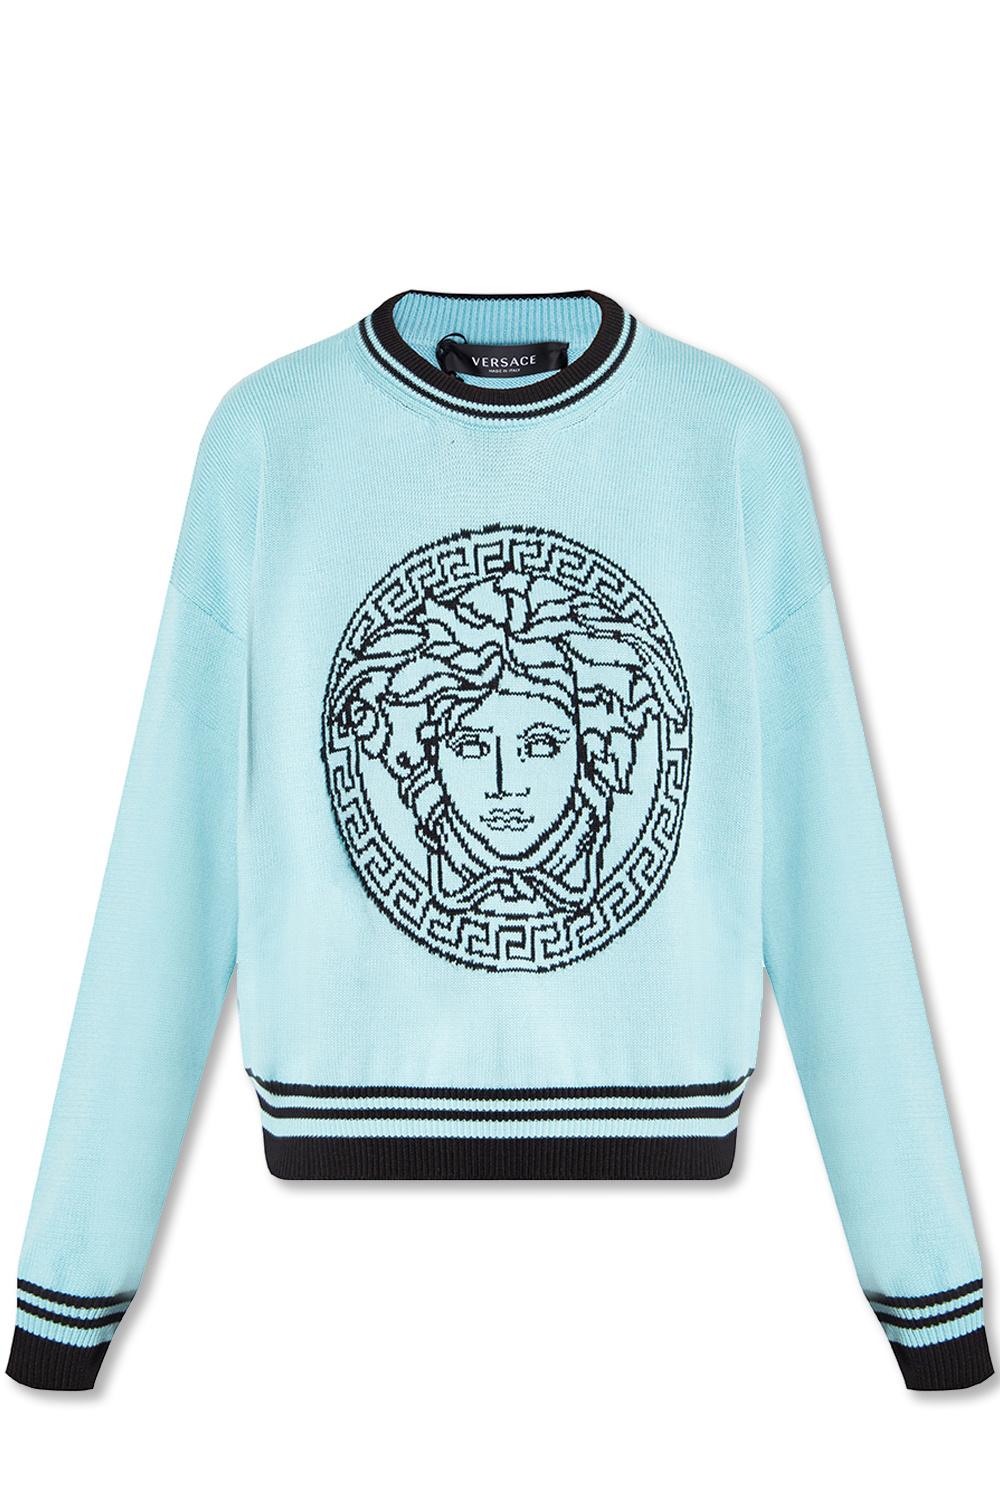 Versace Sweater With Medusa Head in Blue